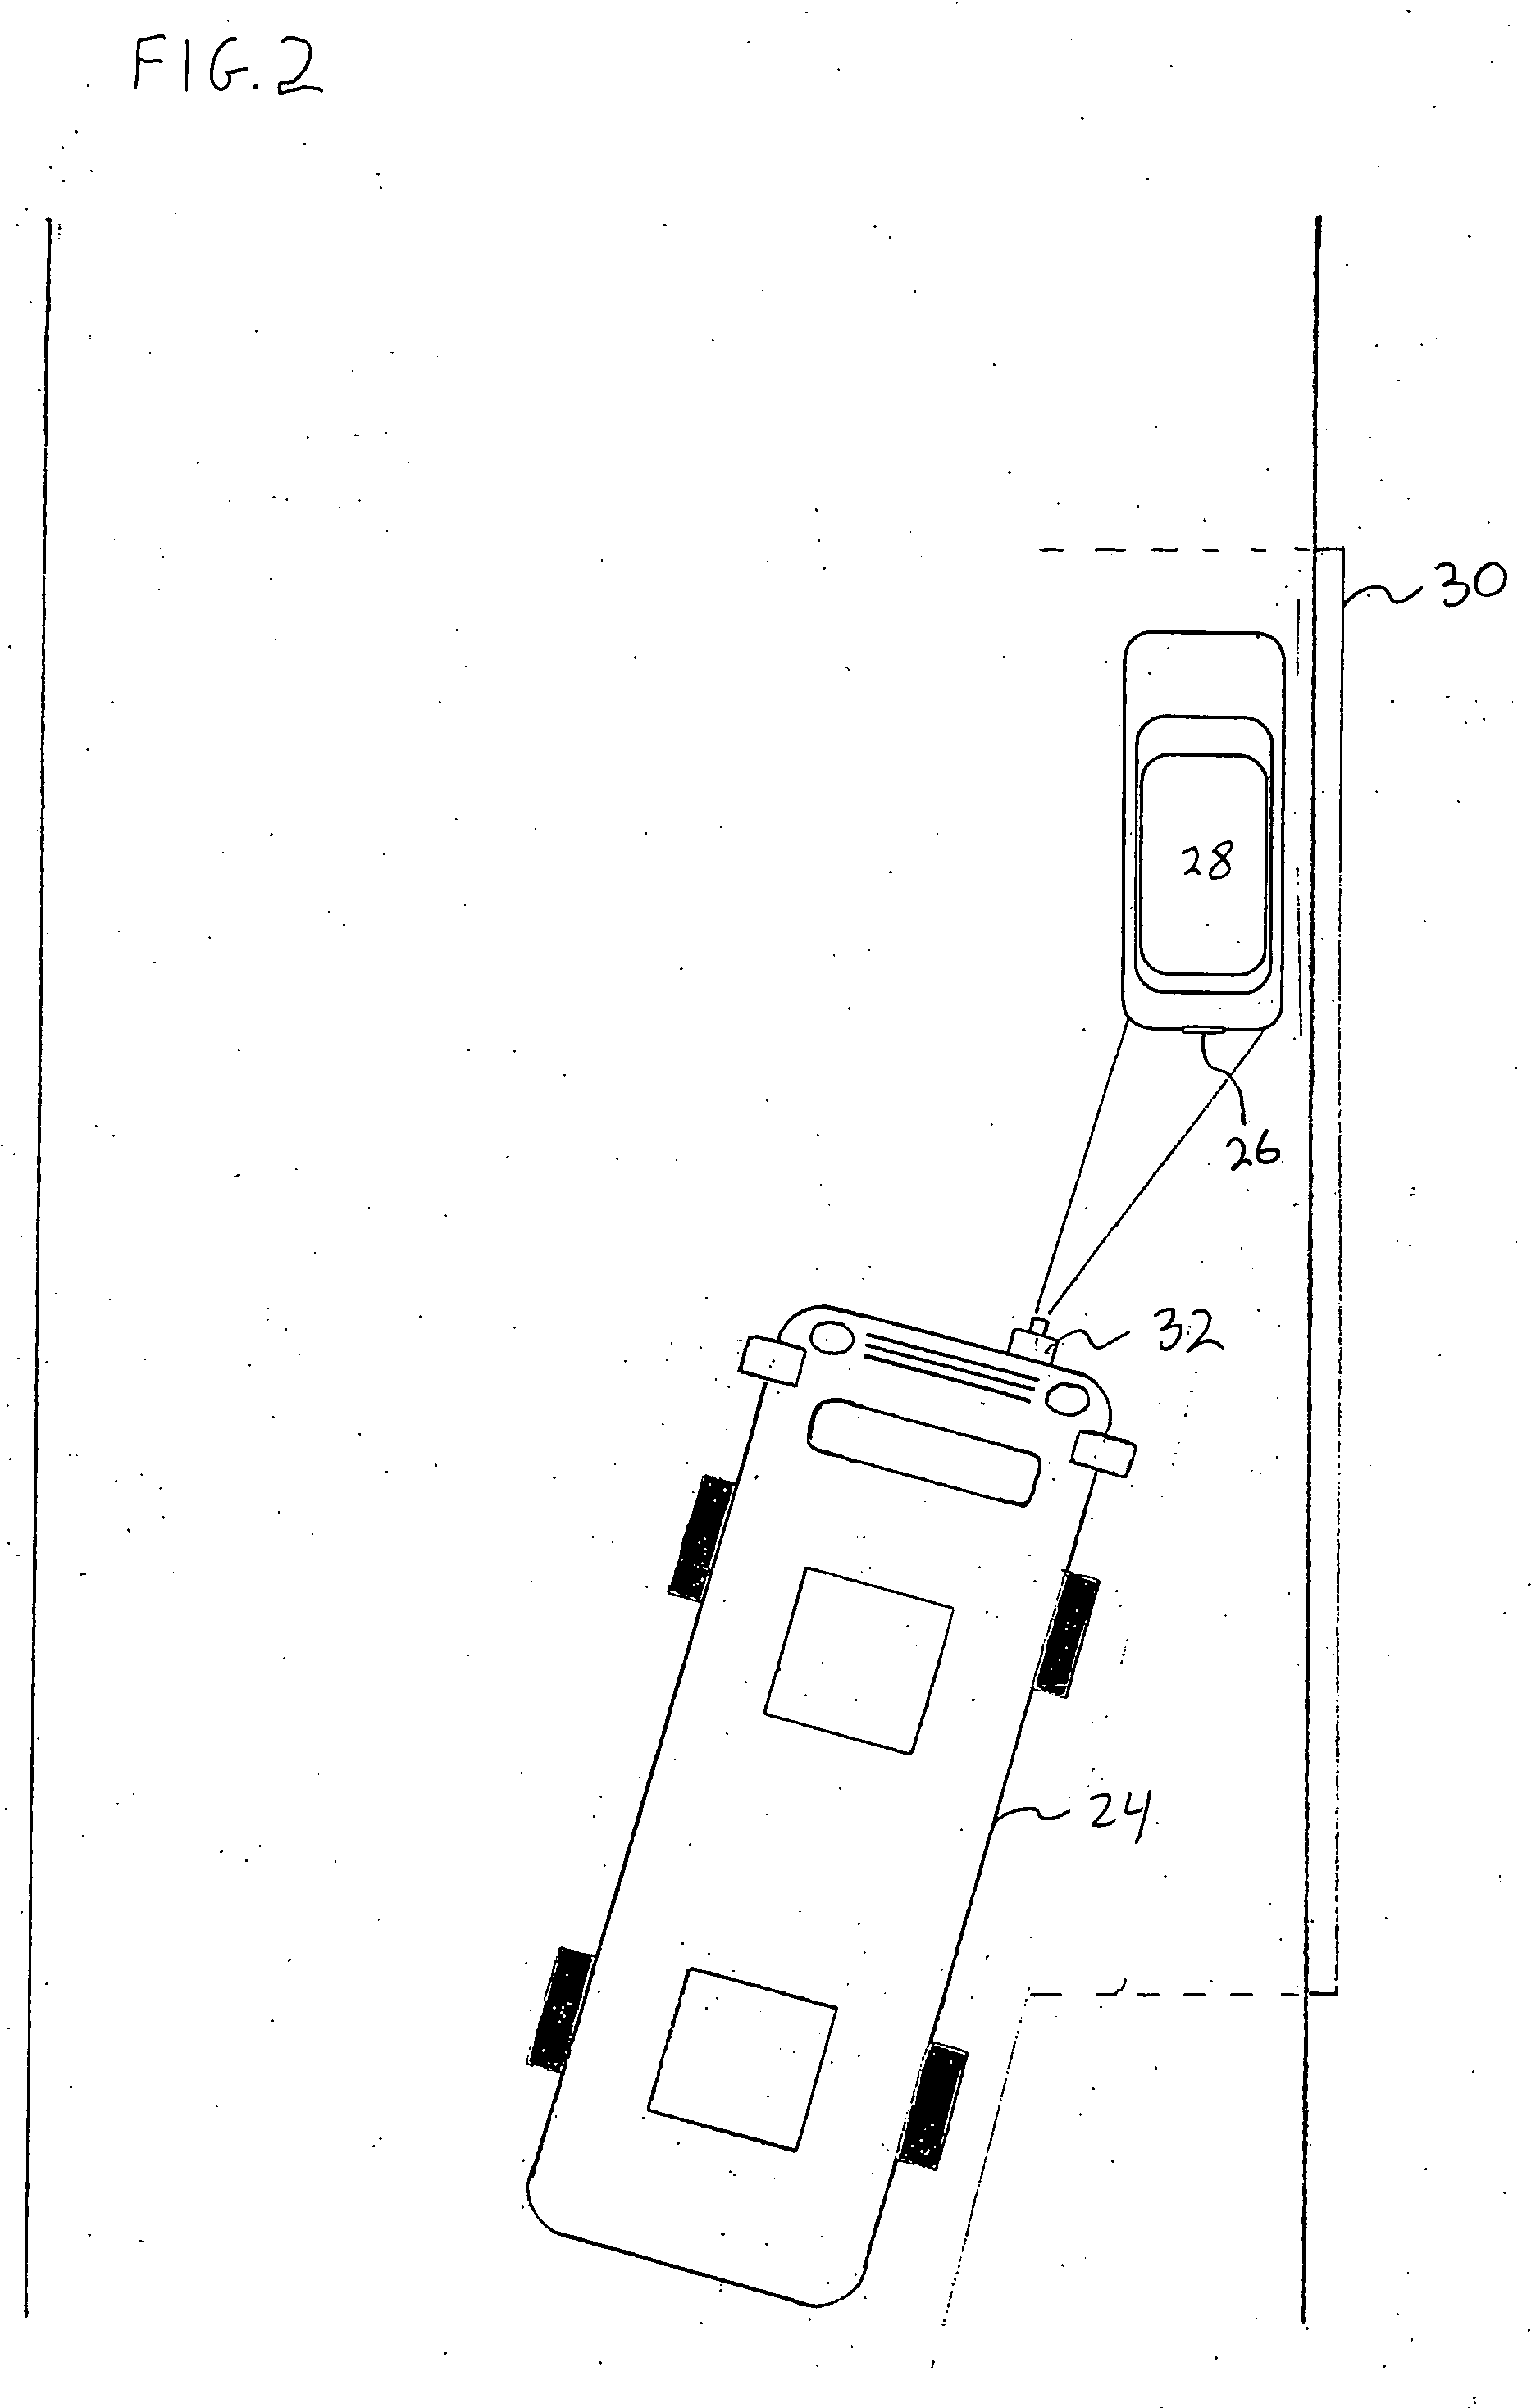 Parking violation recording system and method